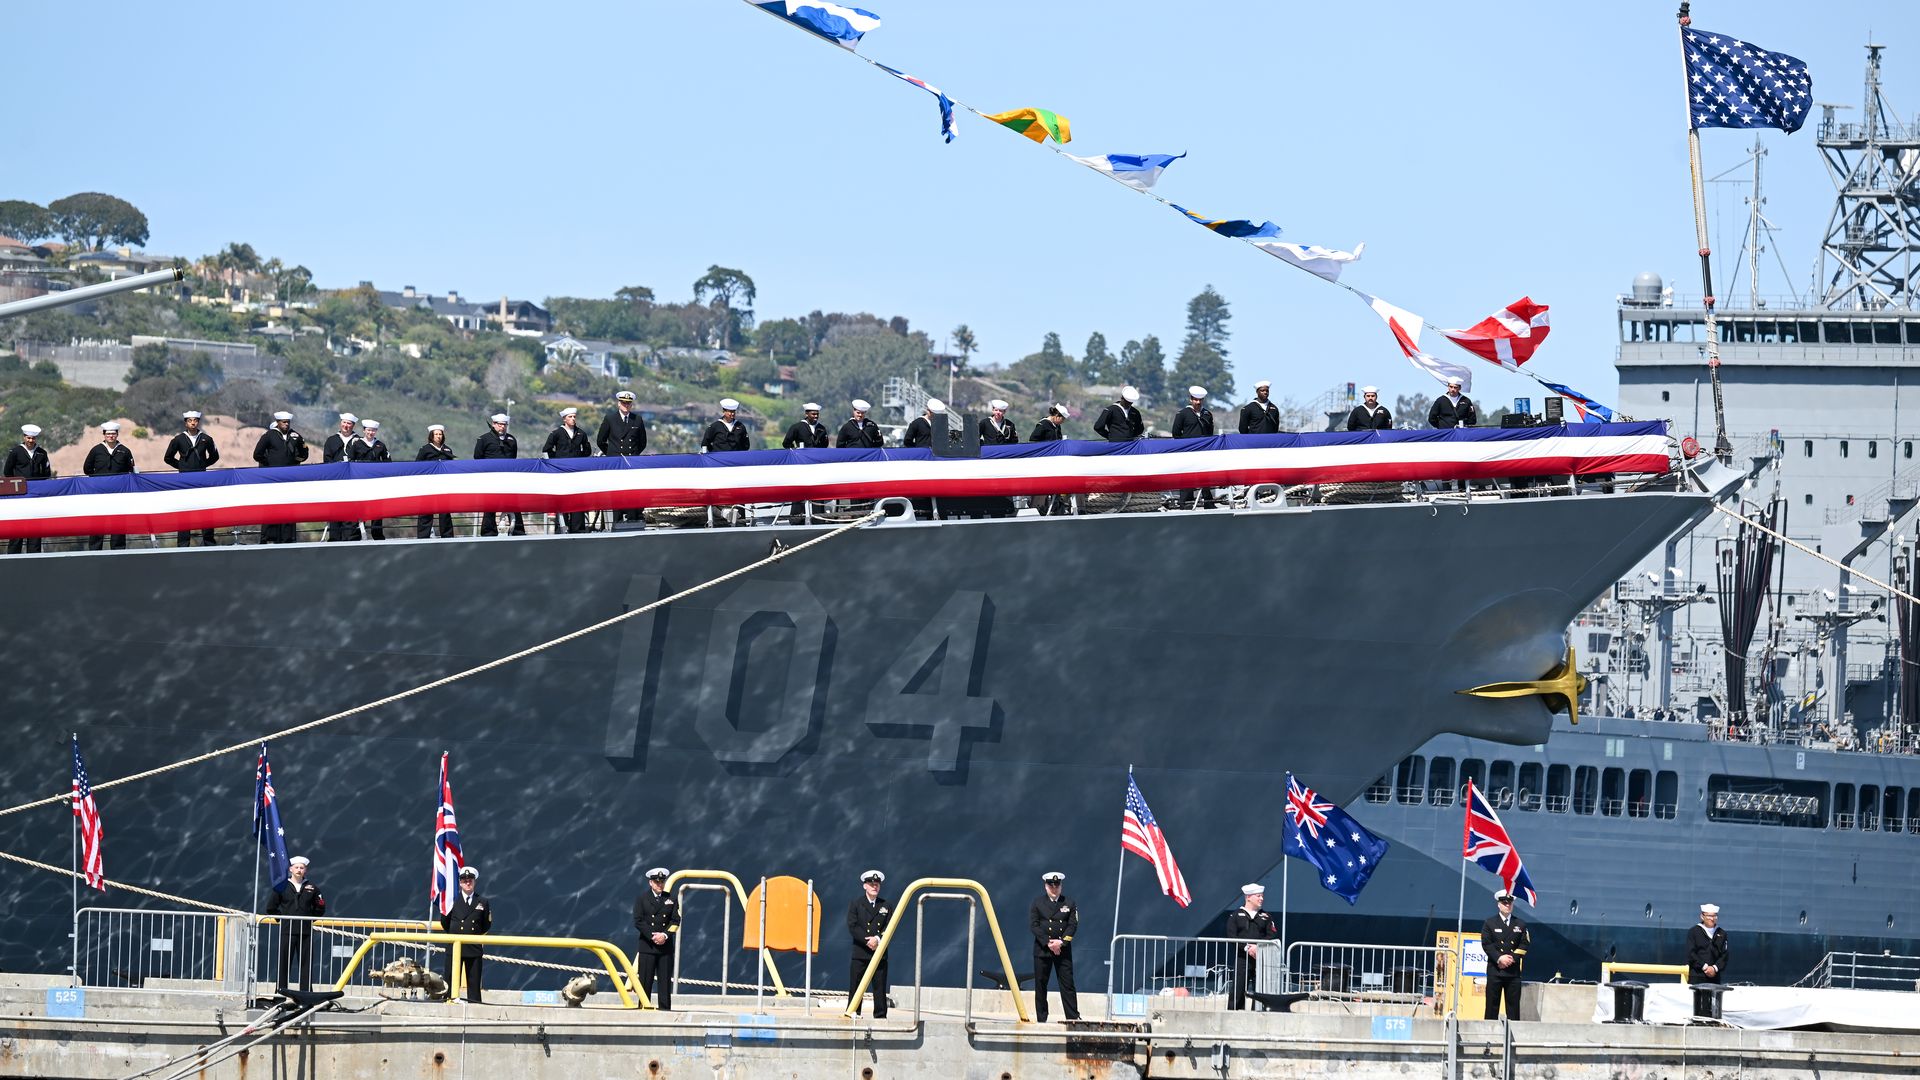 Marines and sailors in uniform stand on a navy ship with different country's flags flying and on a platform below the ship at Naval Base Point Loma in San Diego.